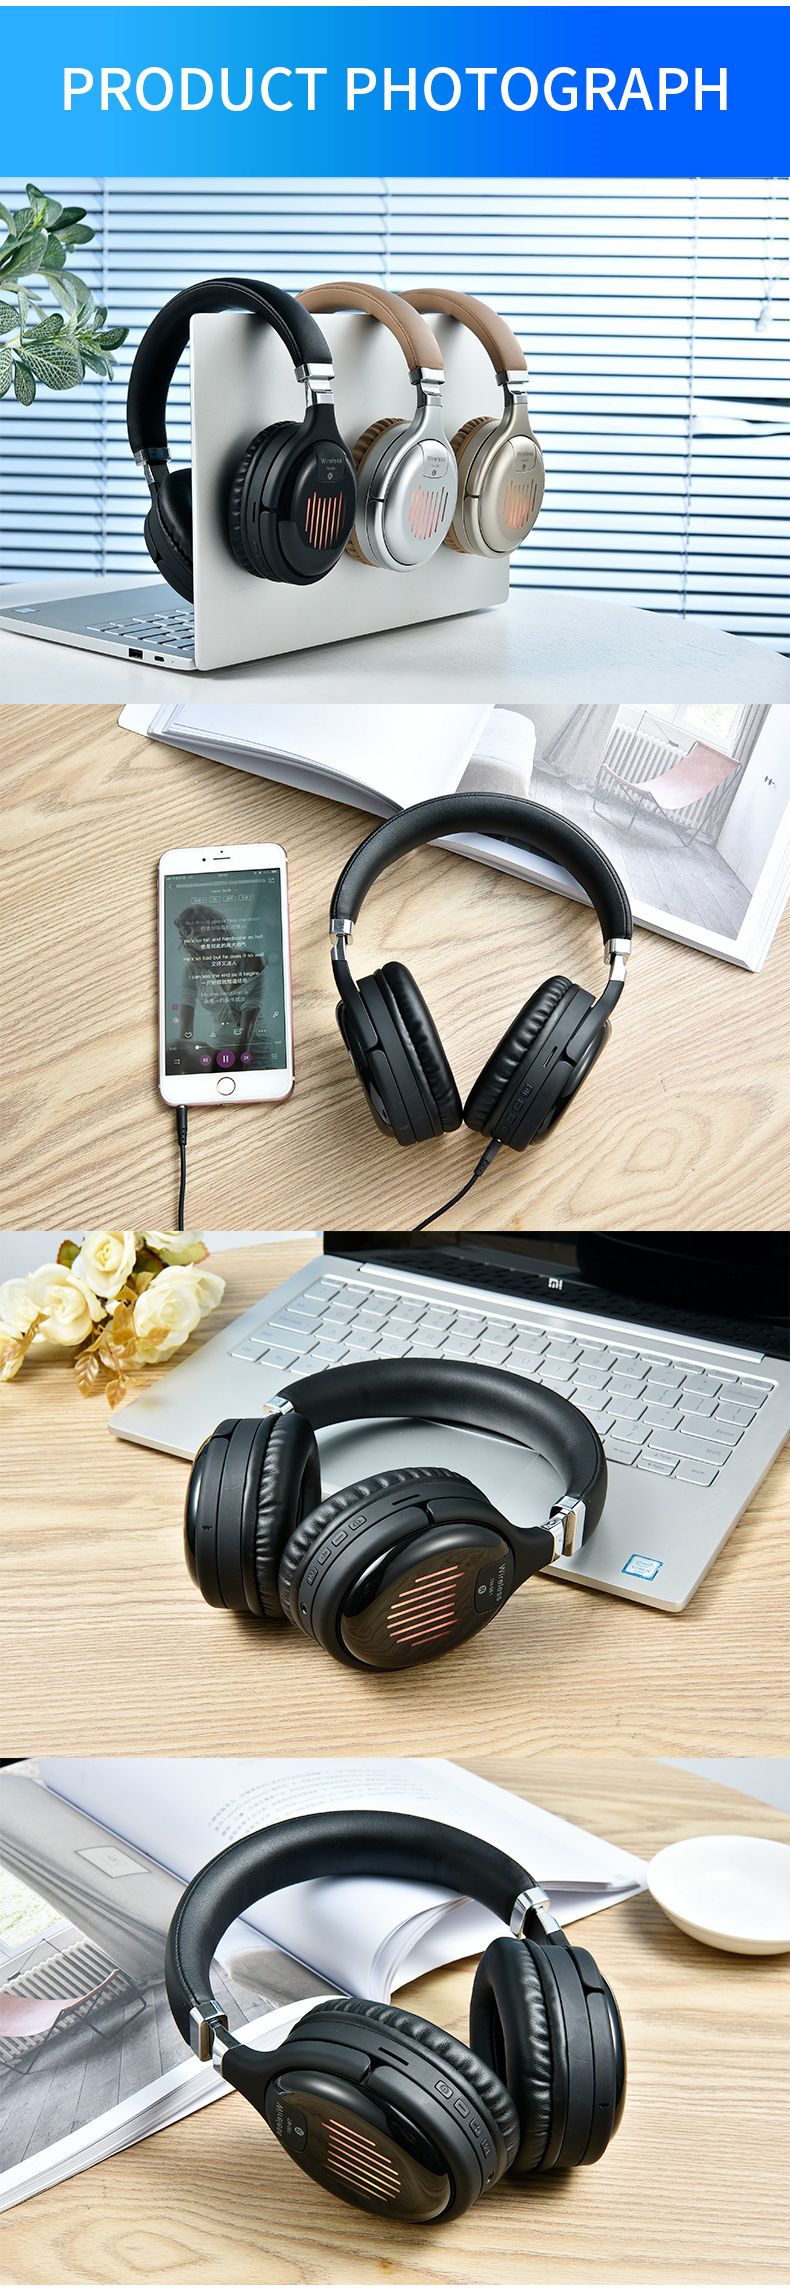 TM061-Wireless-bluetooth-42-Headphone-With-Mic-3D-Stereo-Foldable-Gaming-Headset-Support-TF-Card-MP3-1649677